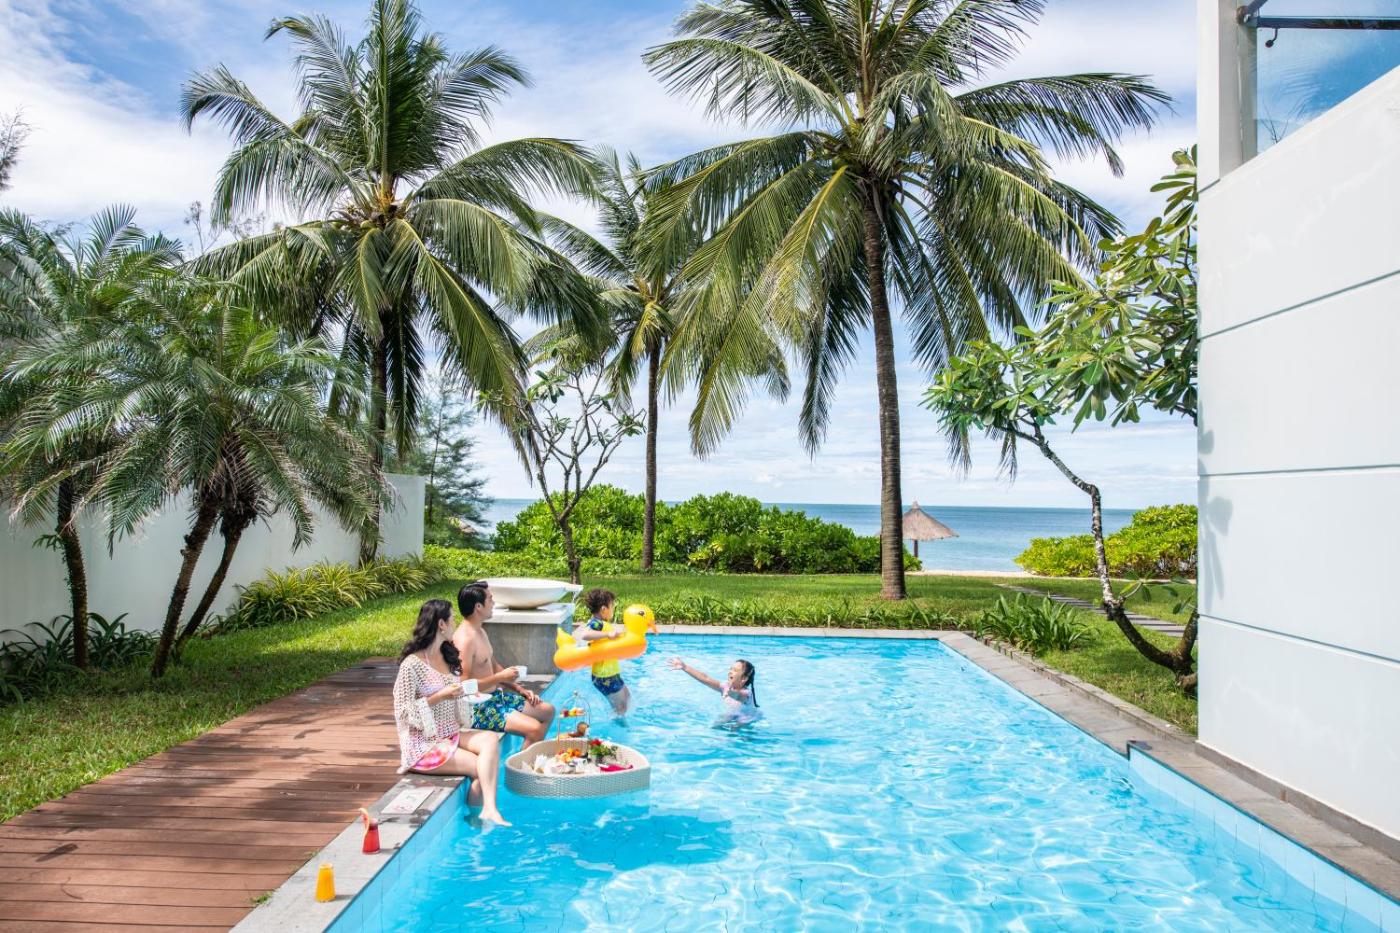 Hotel with private pool - Vinpearl Resort & Spa Phu Quoc